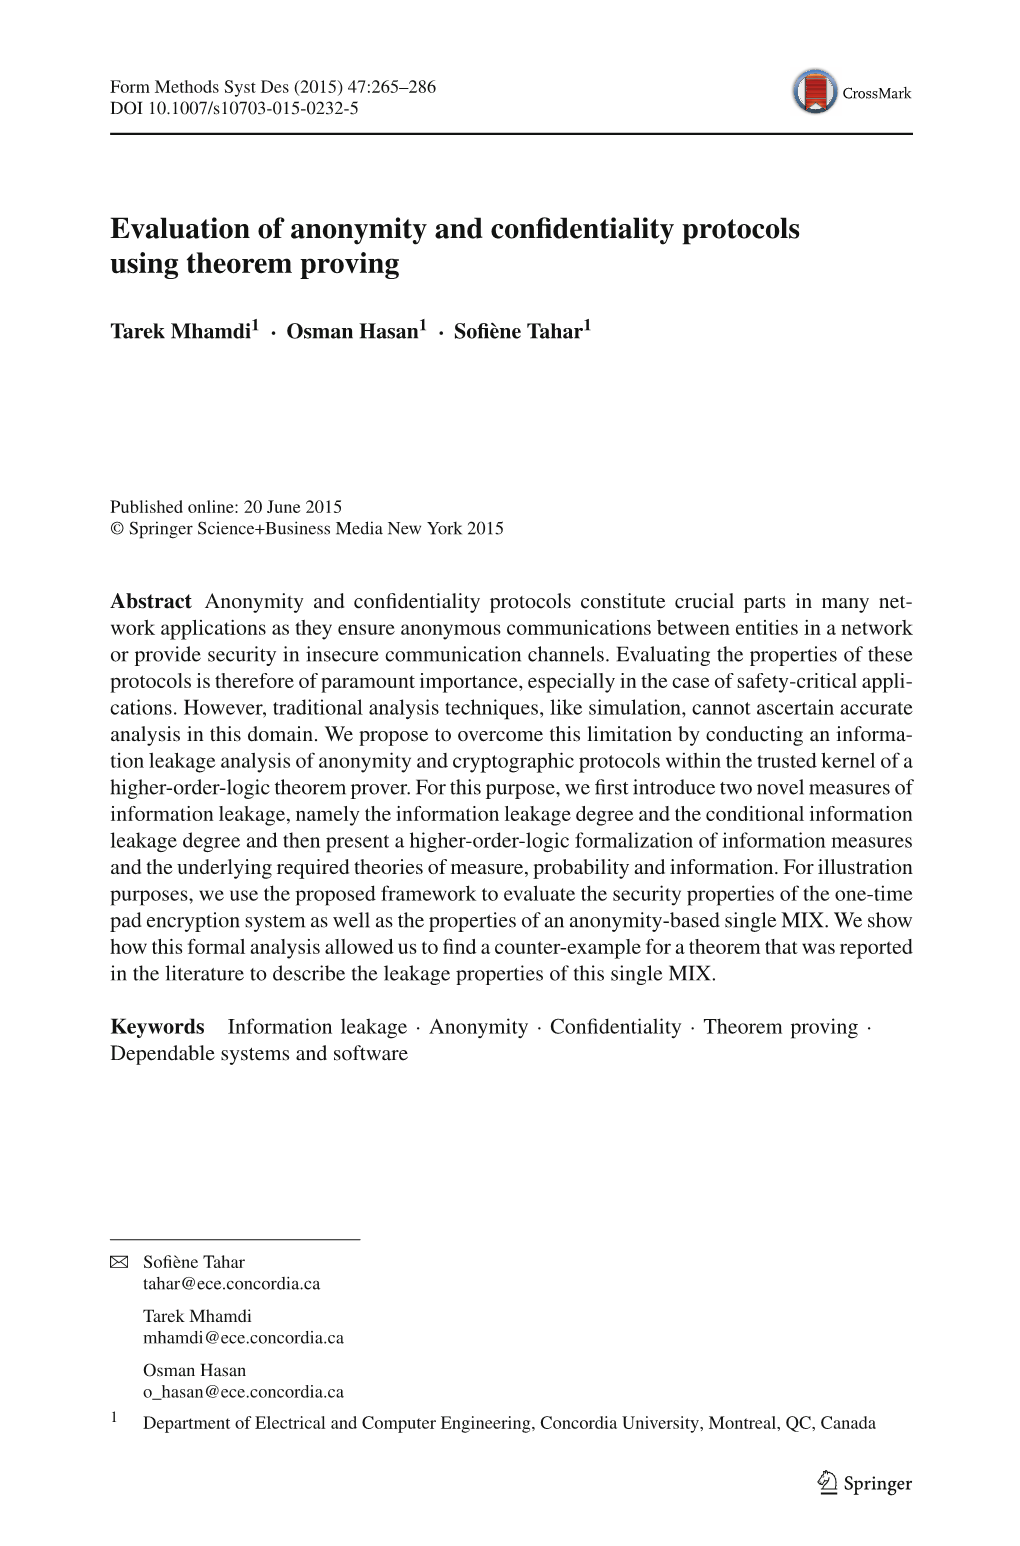 Evaluation of Anonymity and Confidentiality Protocols Using